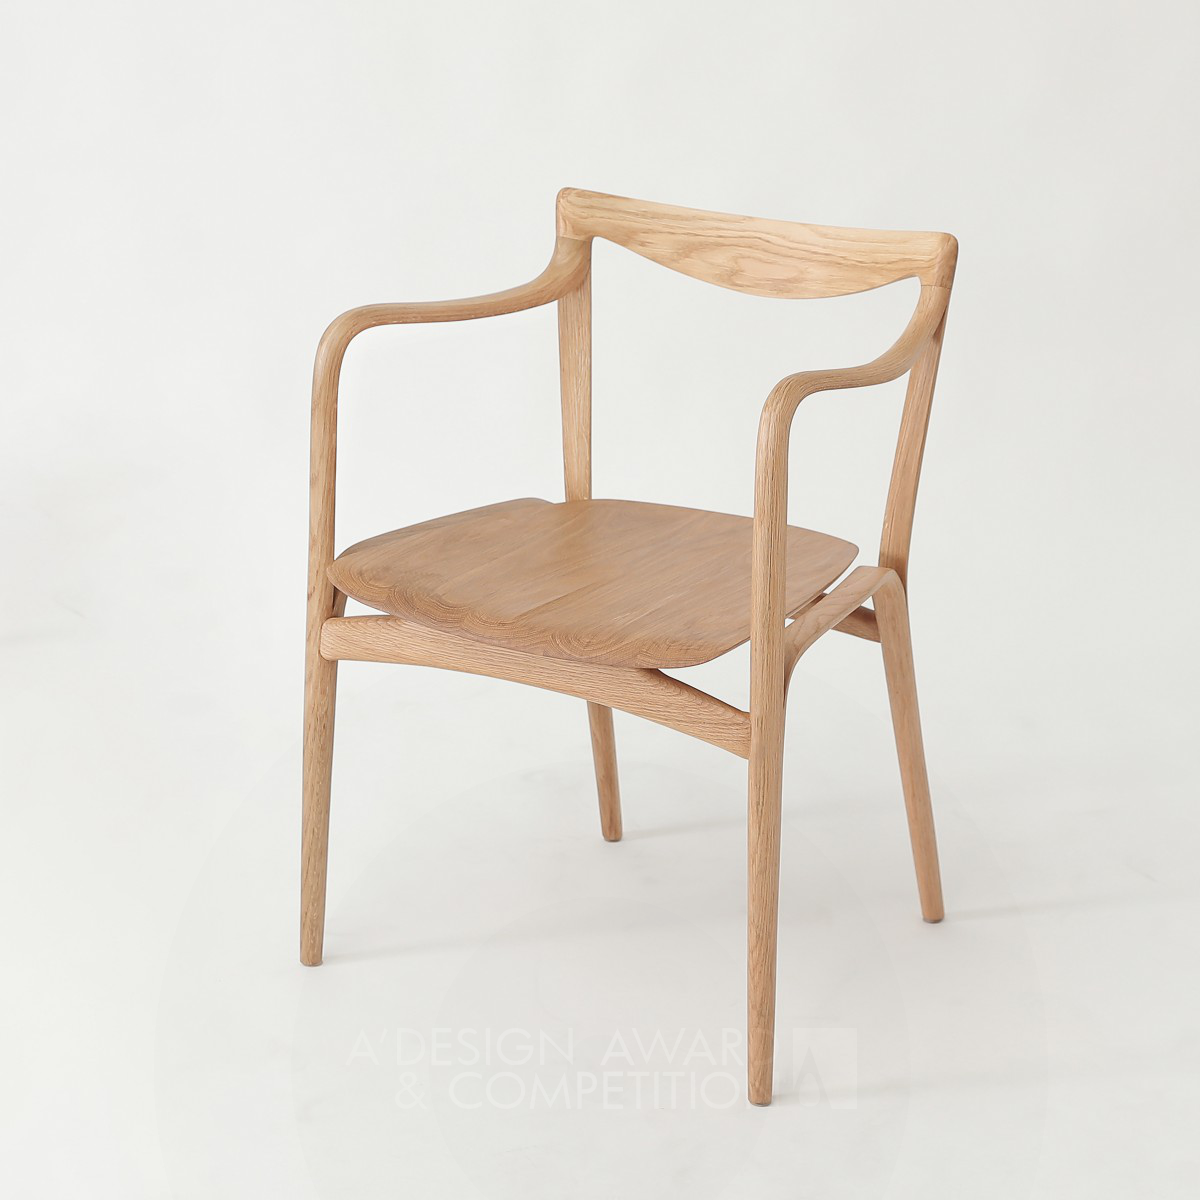 Smile - Chair: Redefining Elegance in Chair Design